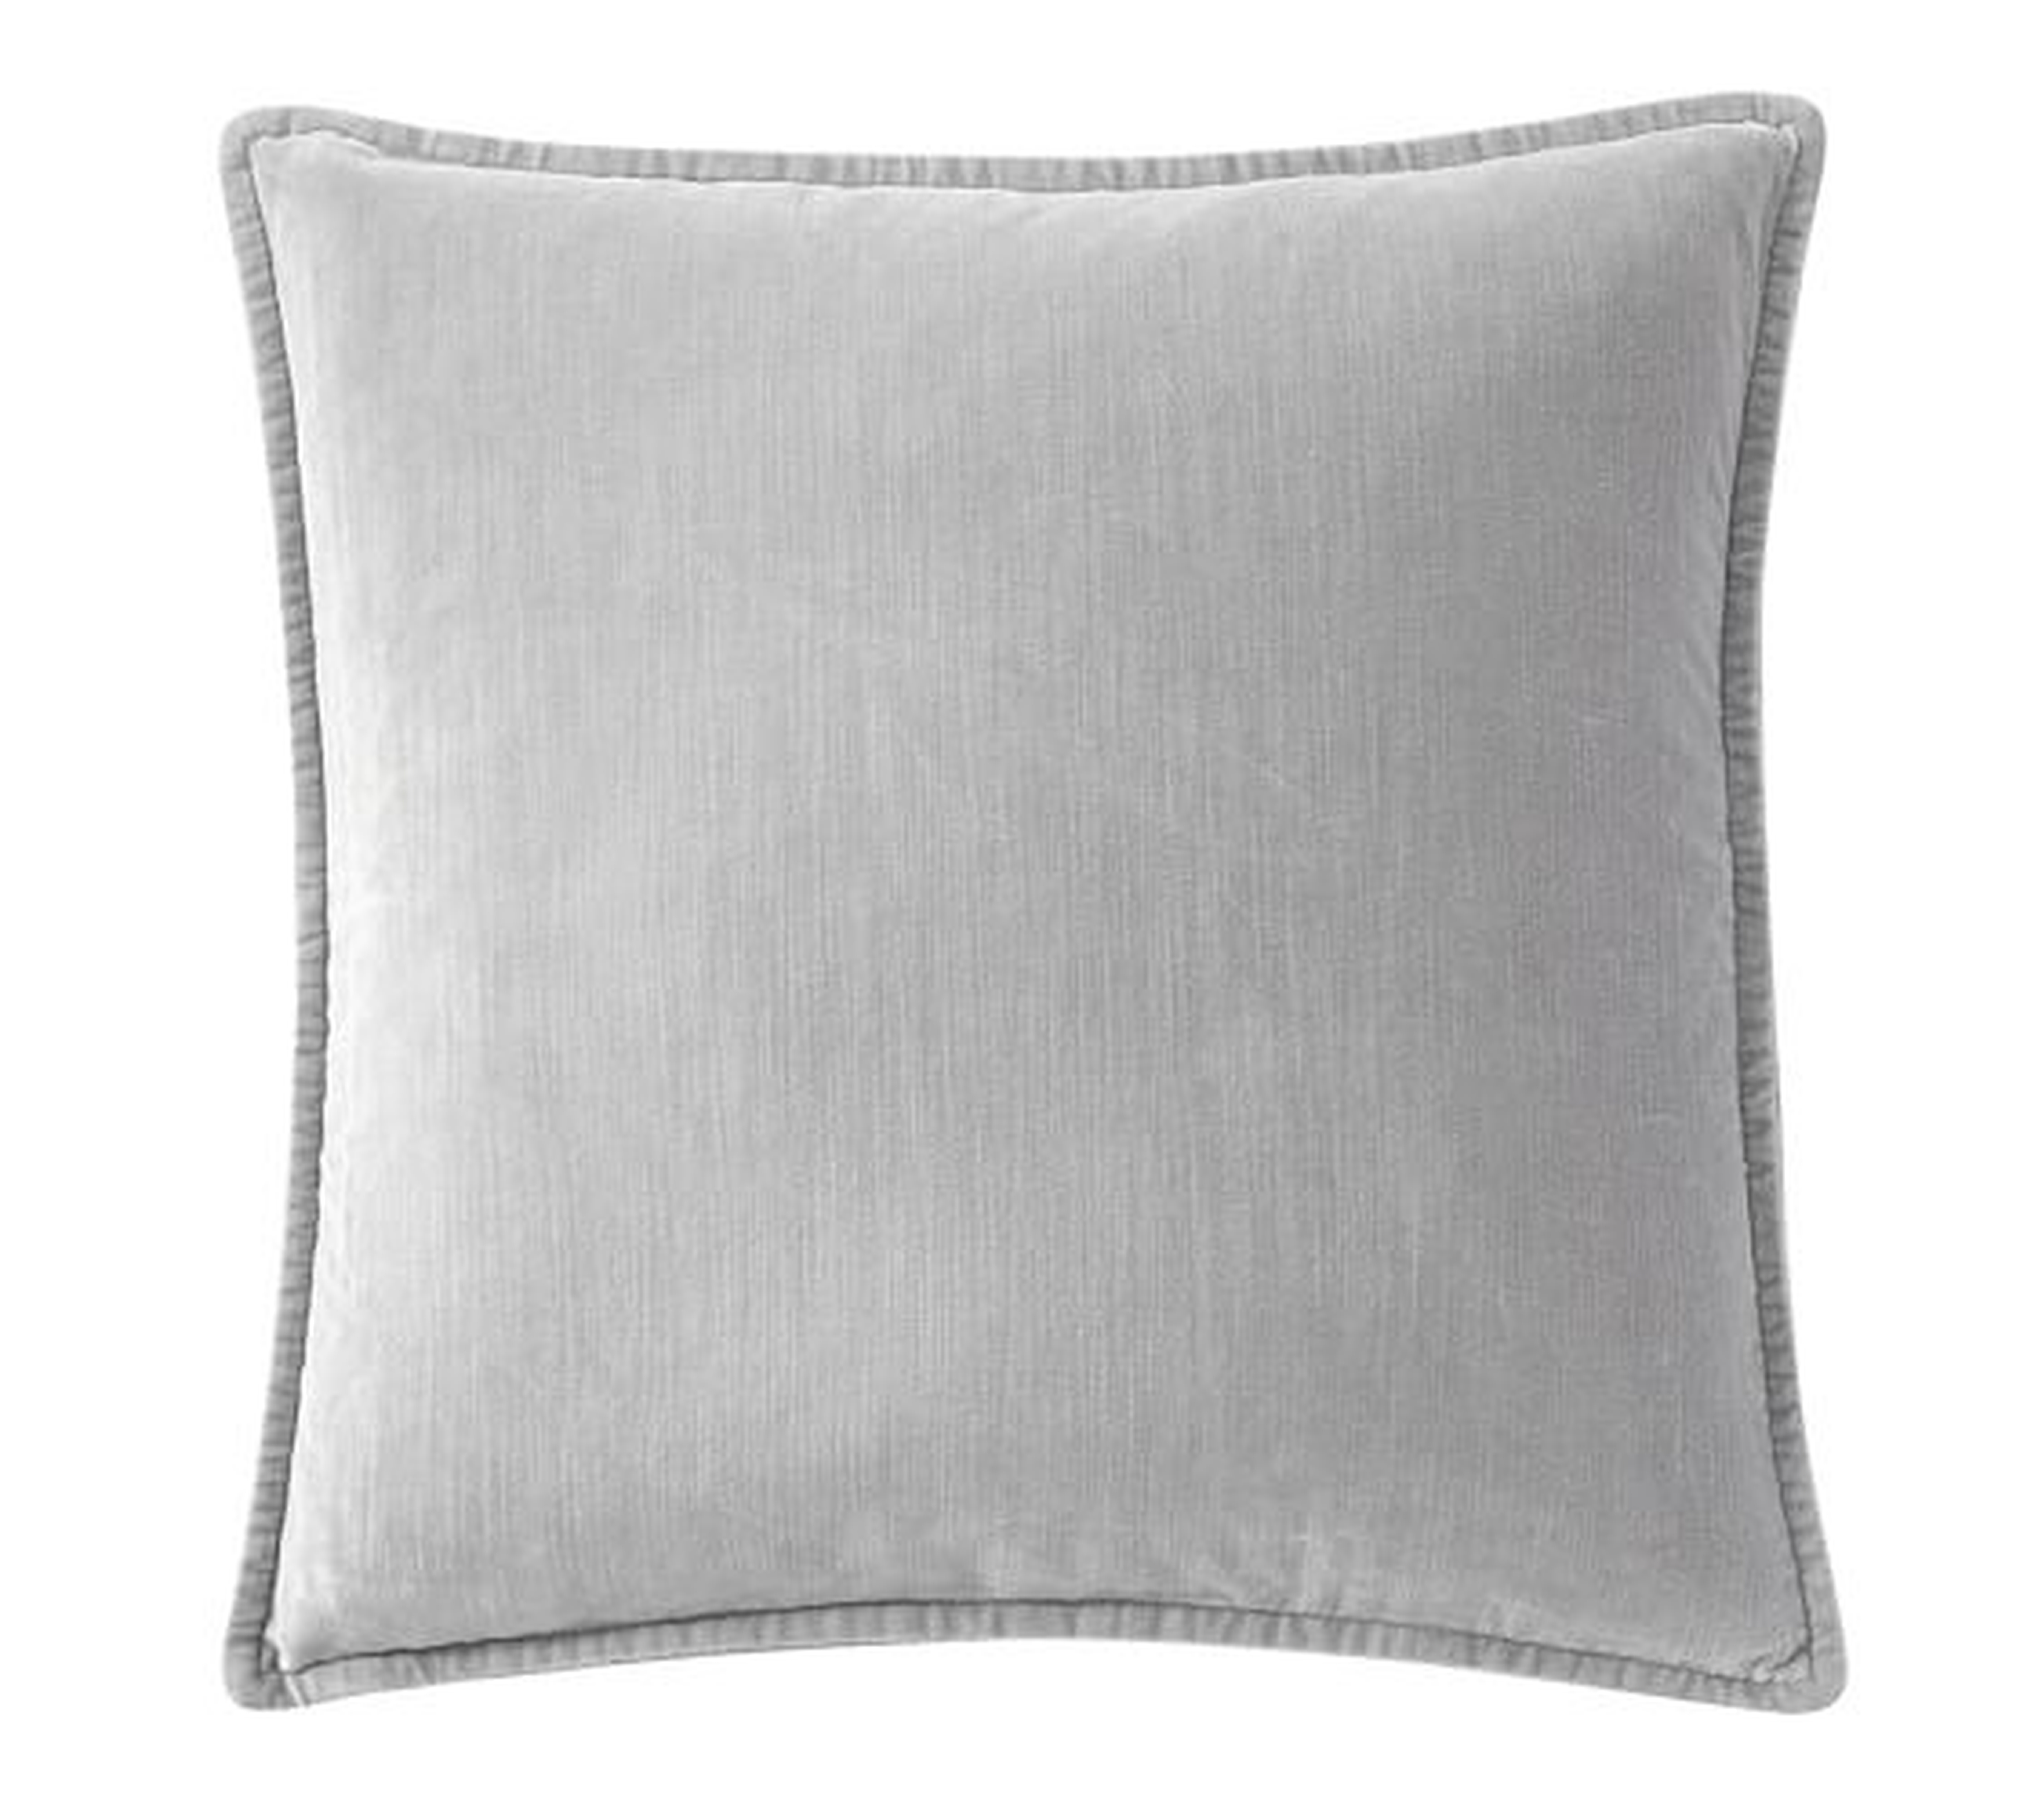 WASHED VELVET PILLOW COVER-20x20-ALLOY GRAY-no insert - Pottery Barn